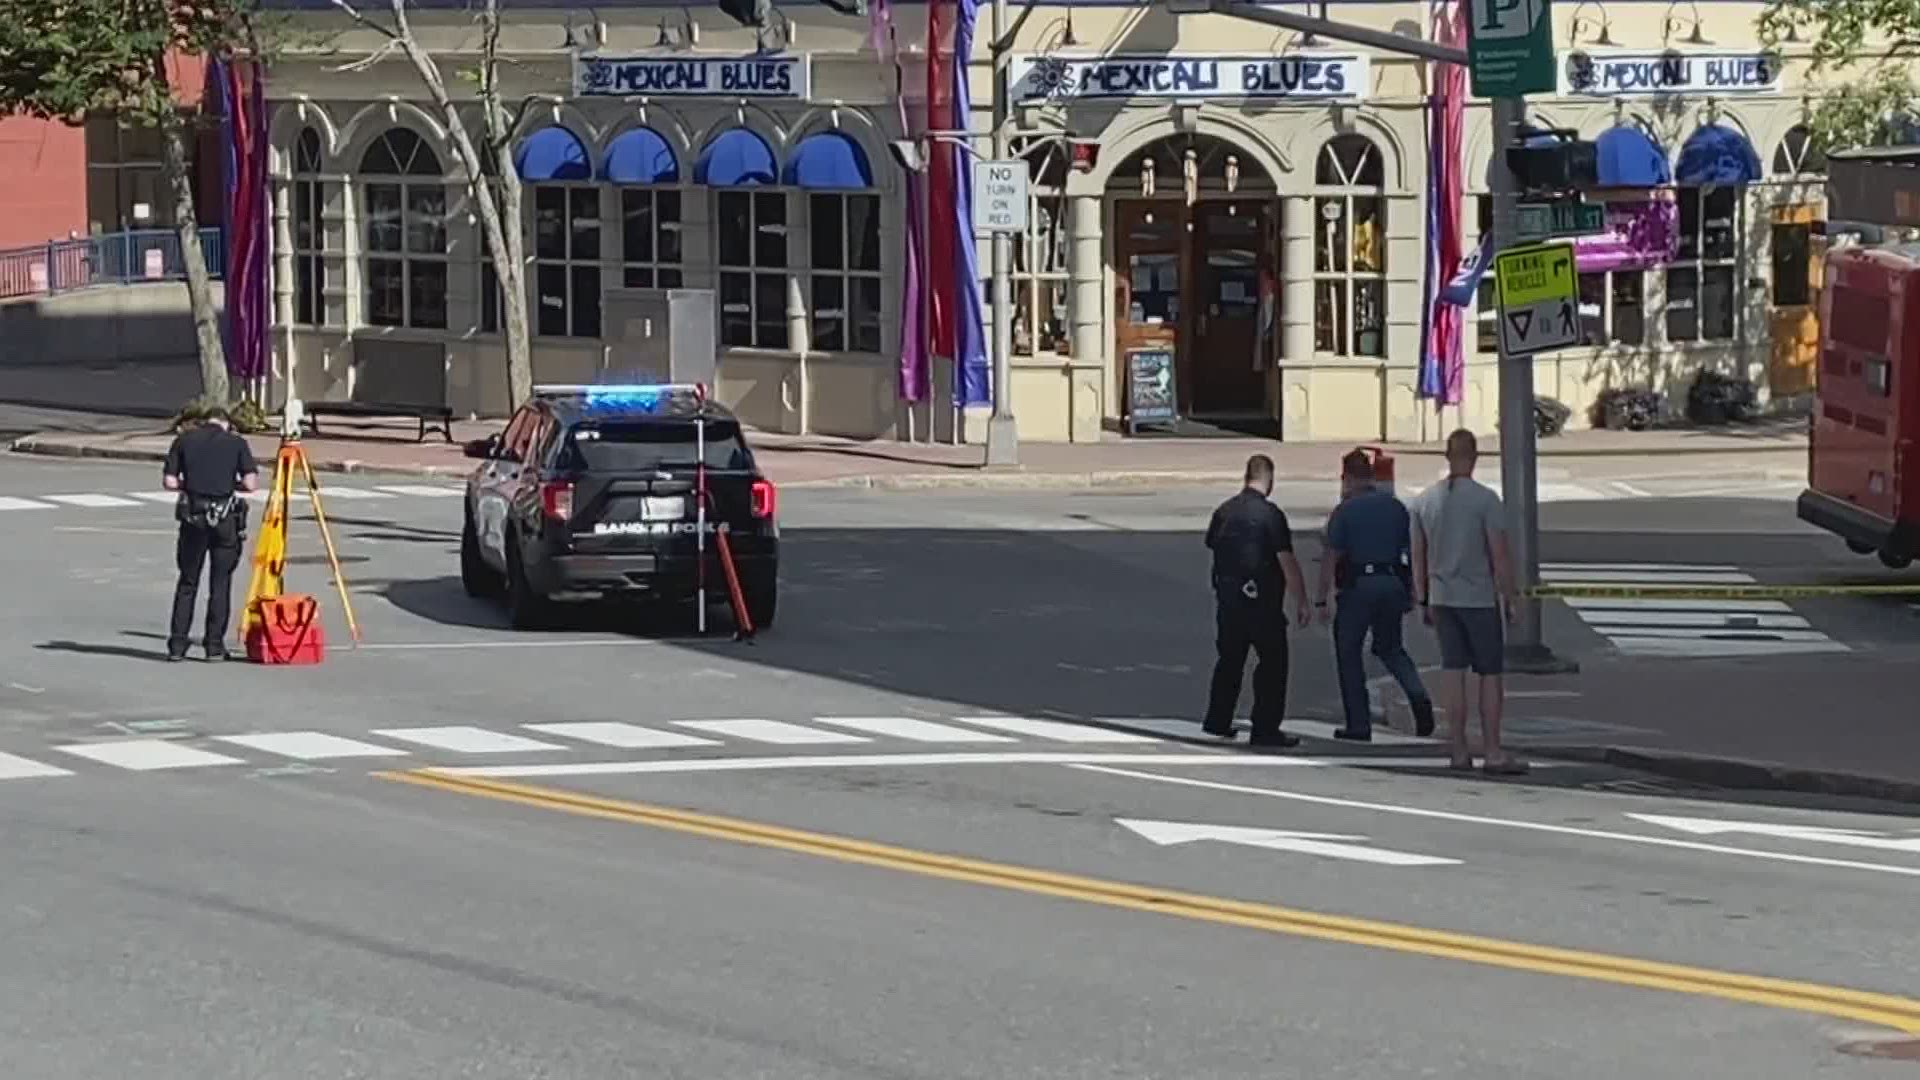 Police in Bangor are investigating after a city bus hit a pedestrian downtown.